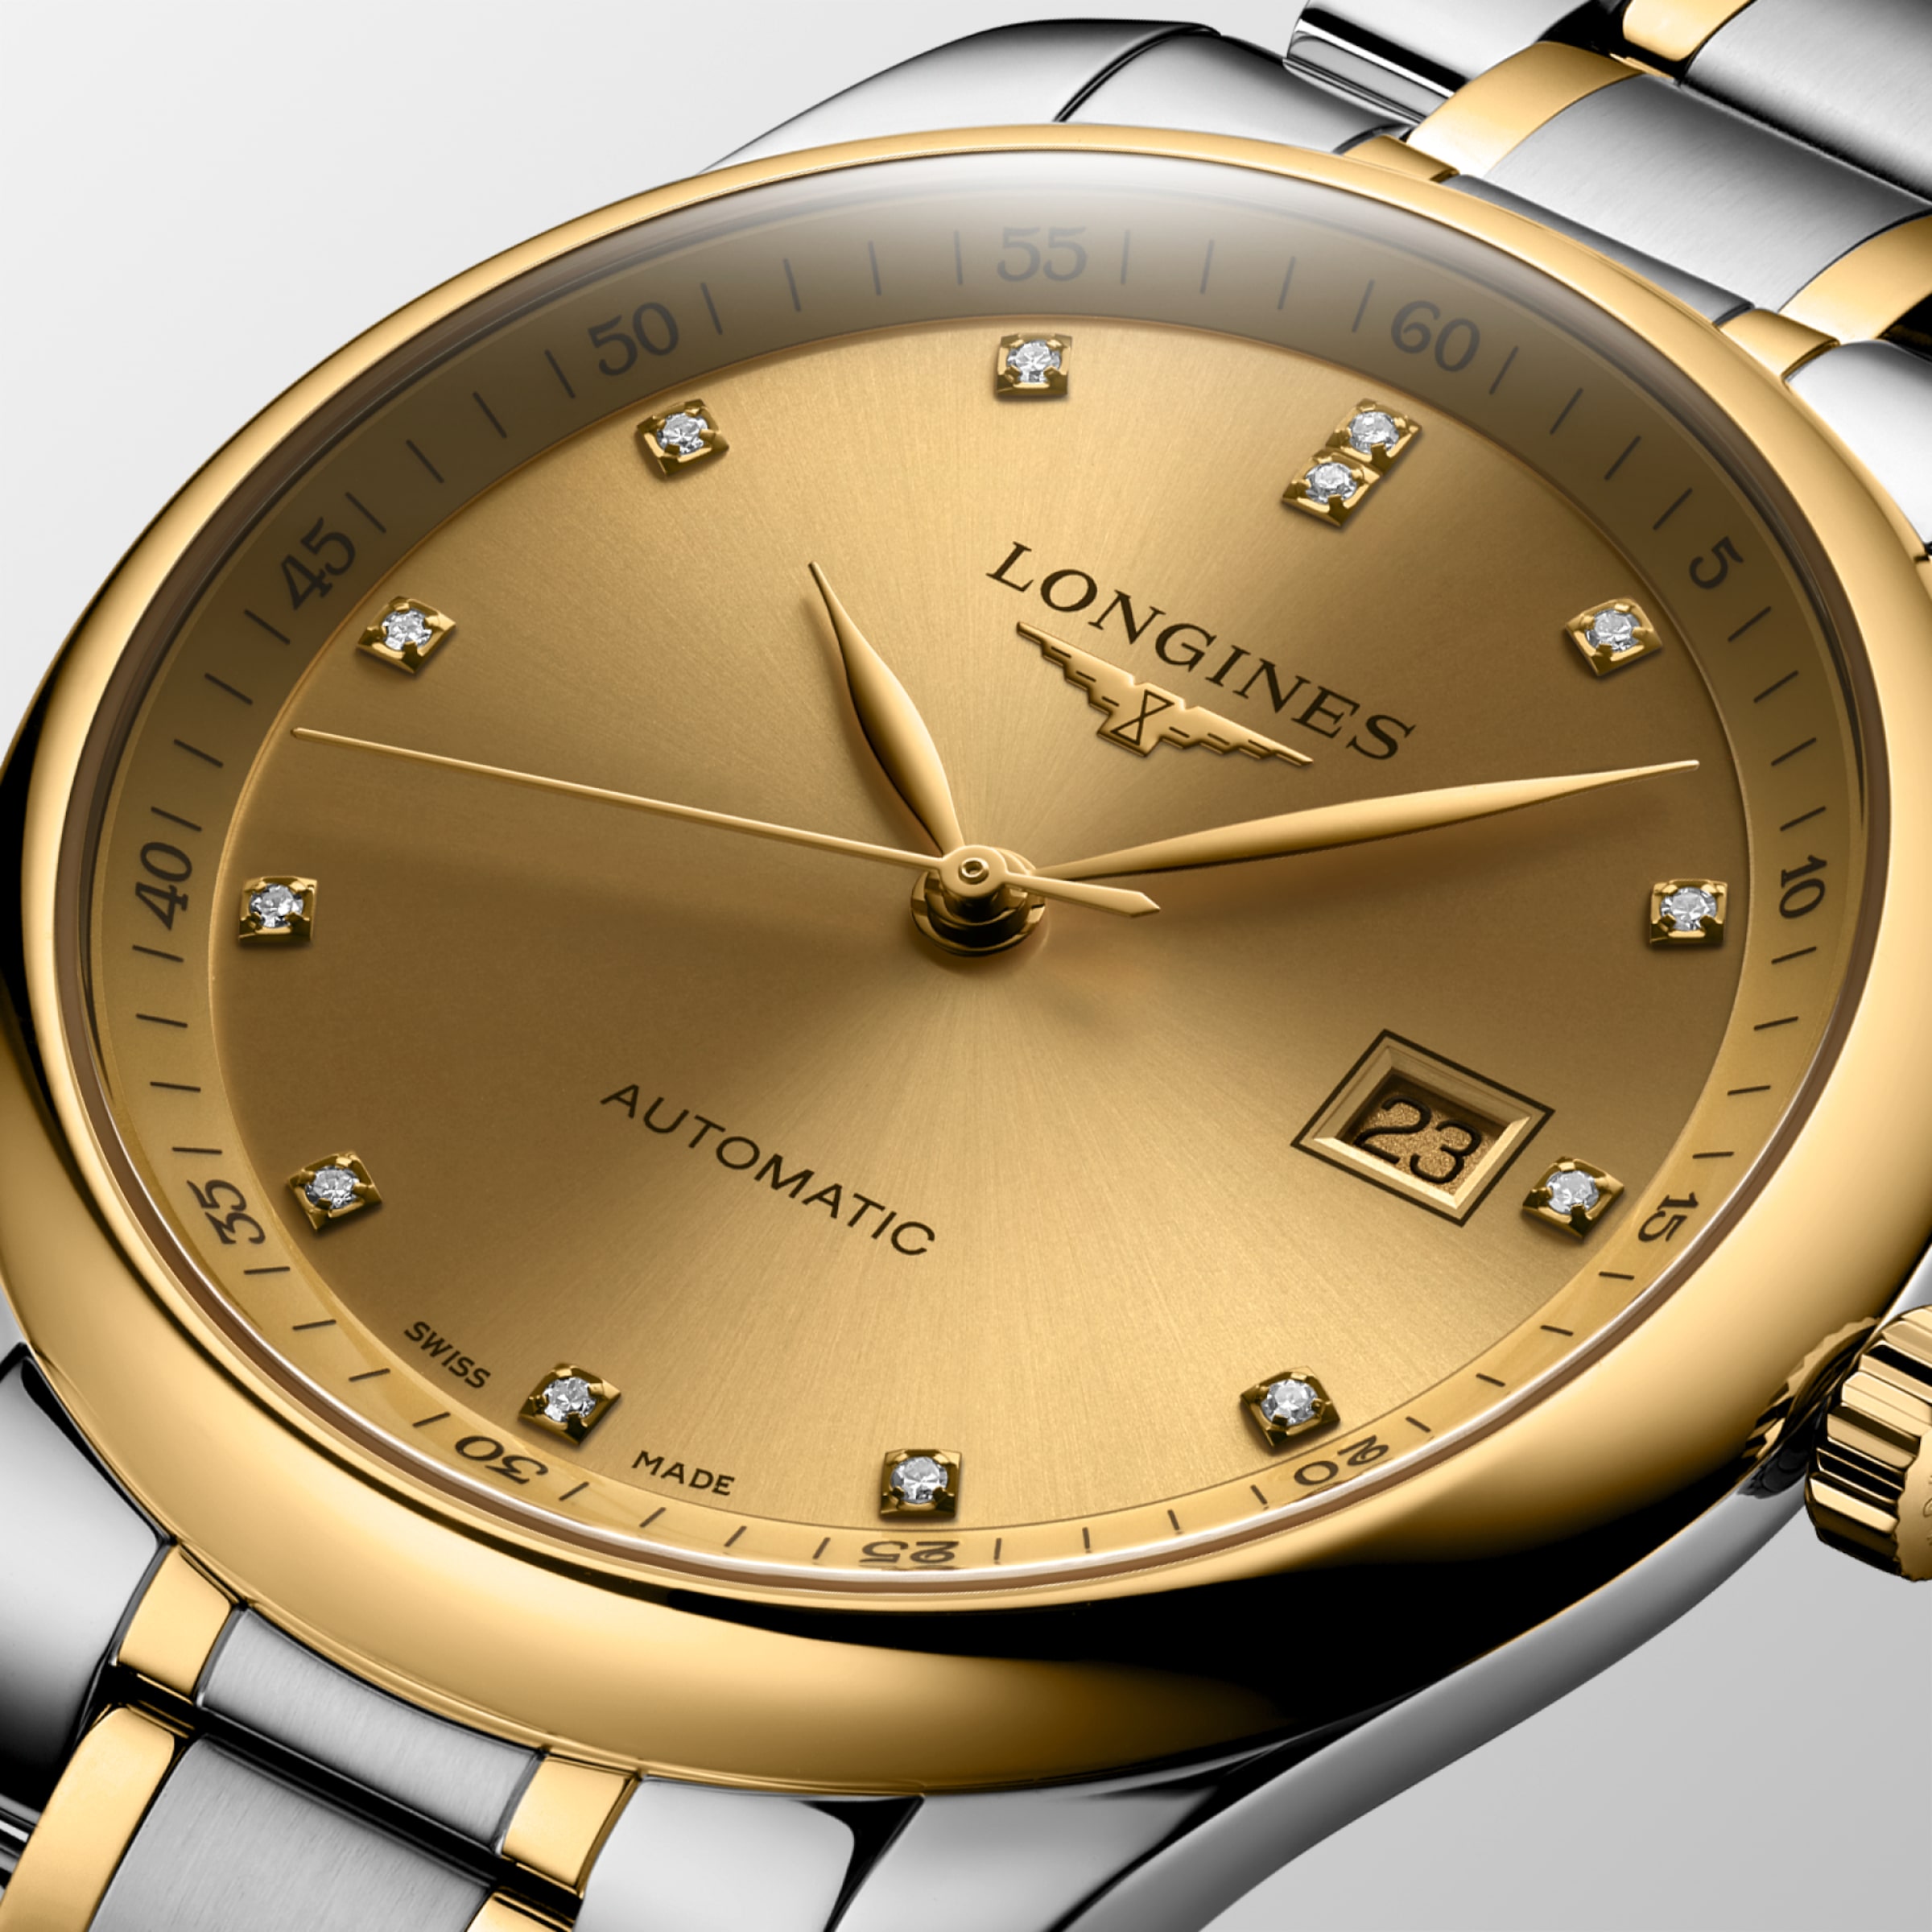 Longines MASTER COLLECTION Automatic Stainless steel and 18 karat yellow gold cap 200 Watch - L2.793.5.37.7